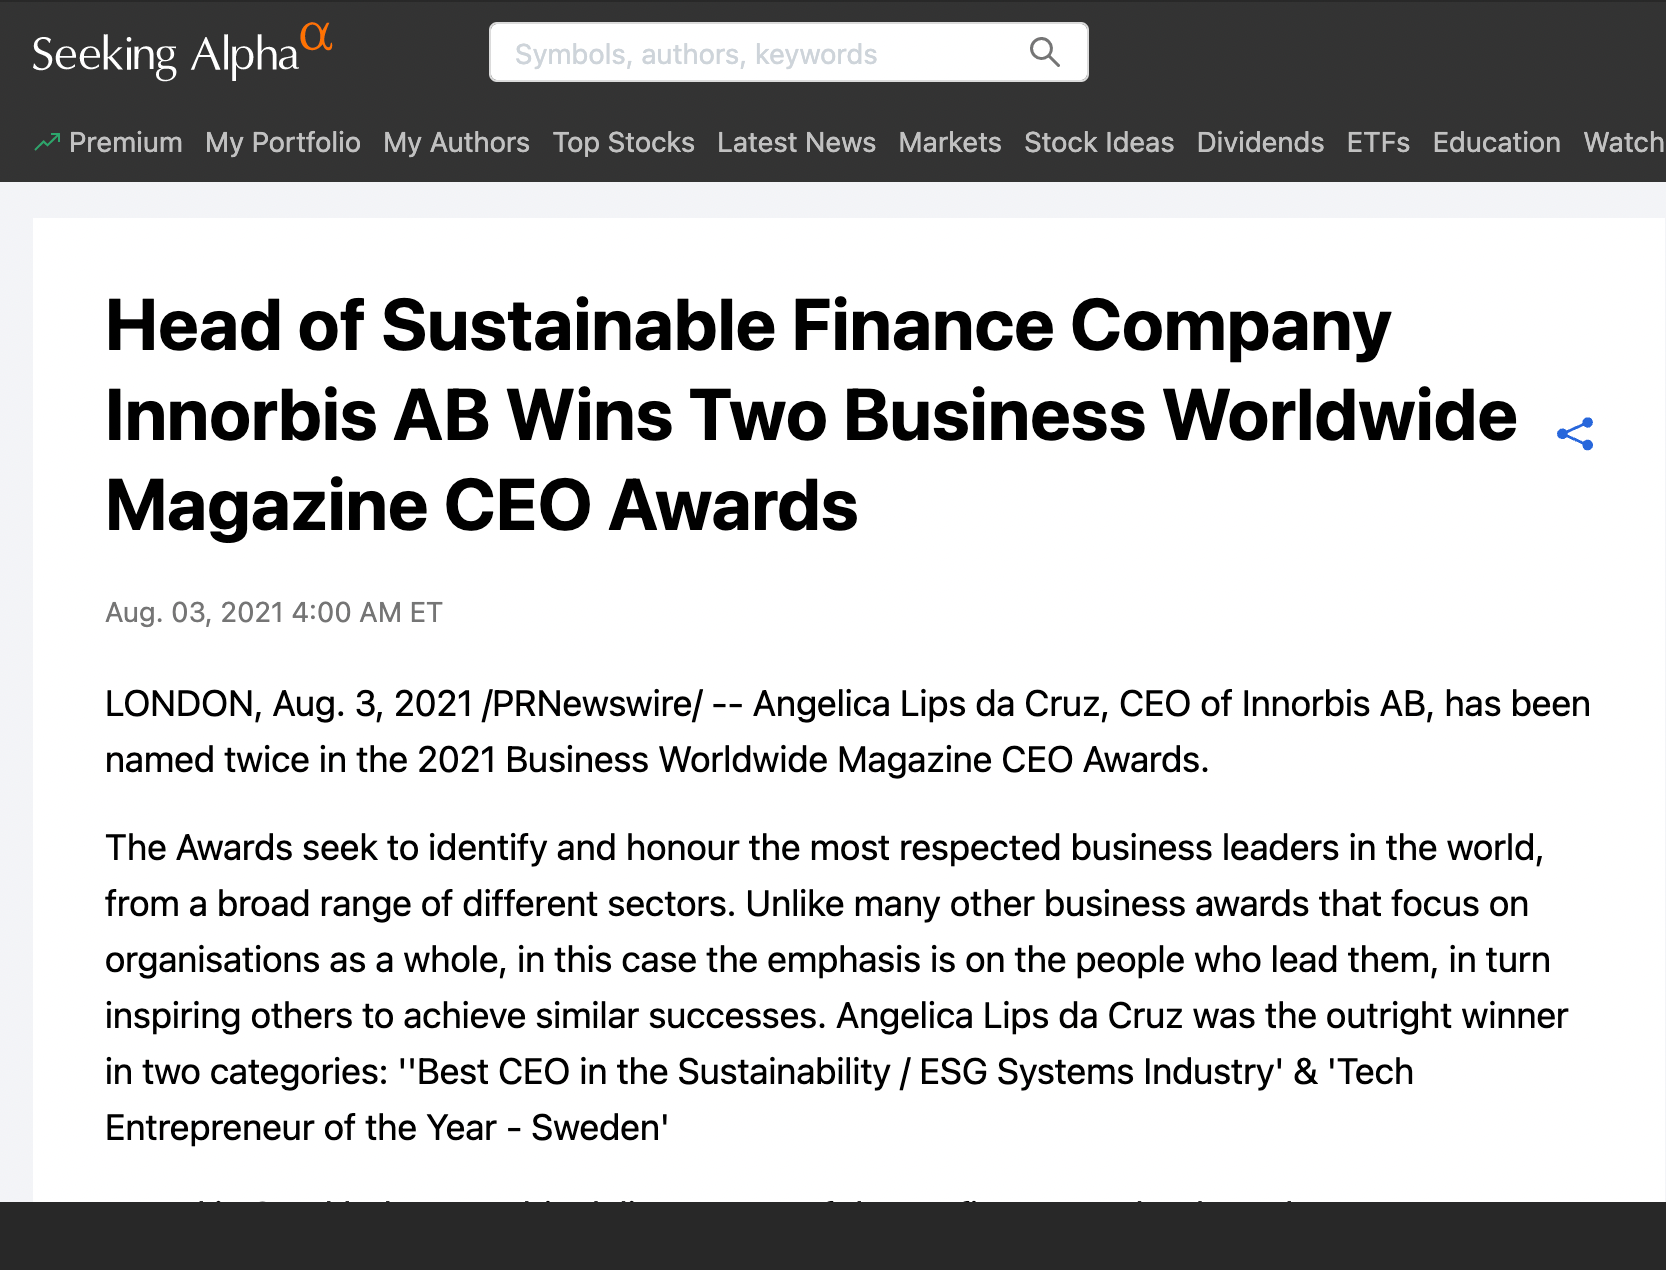 ''Best CEO in the Sustainability / ESG Systems Industry' & 'Tech Entrepreneur of the Year - Sweden'